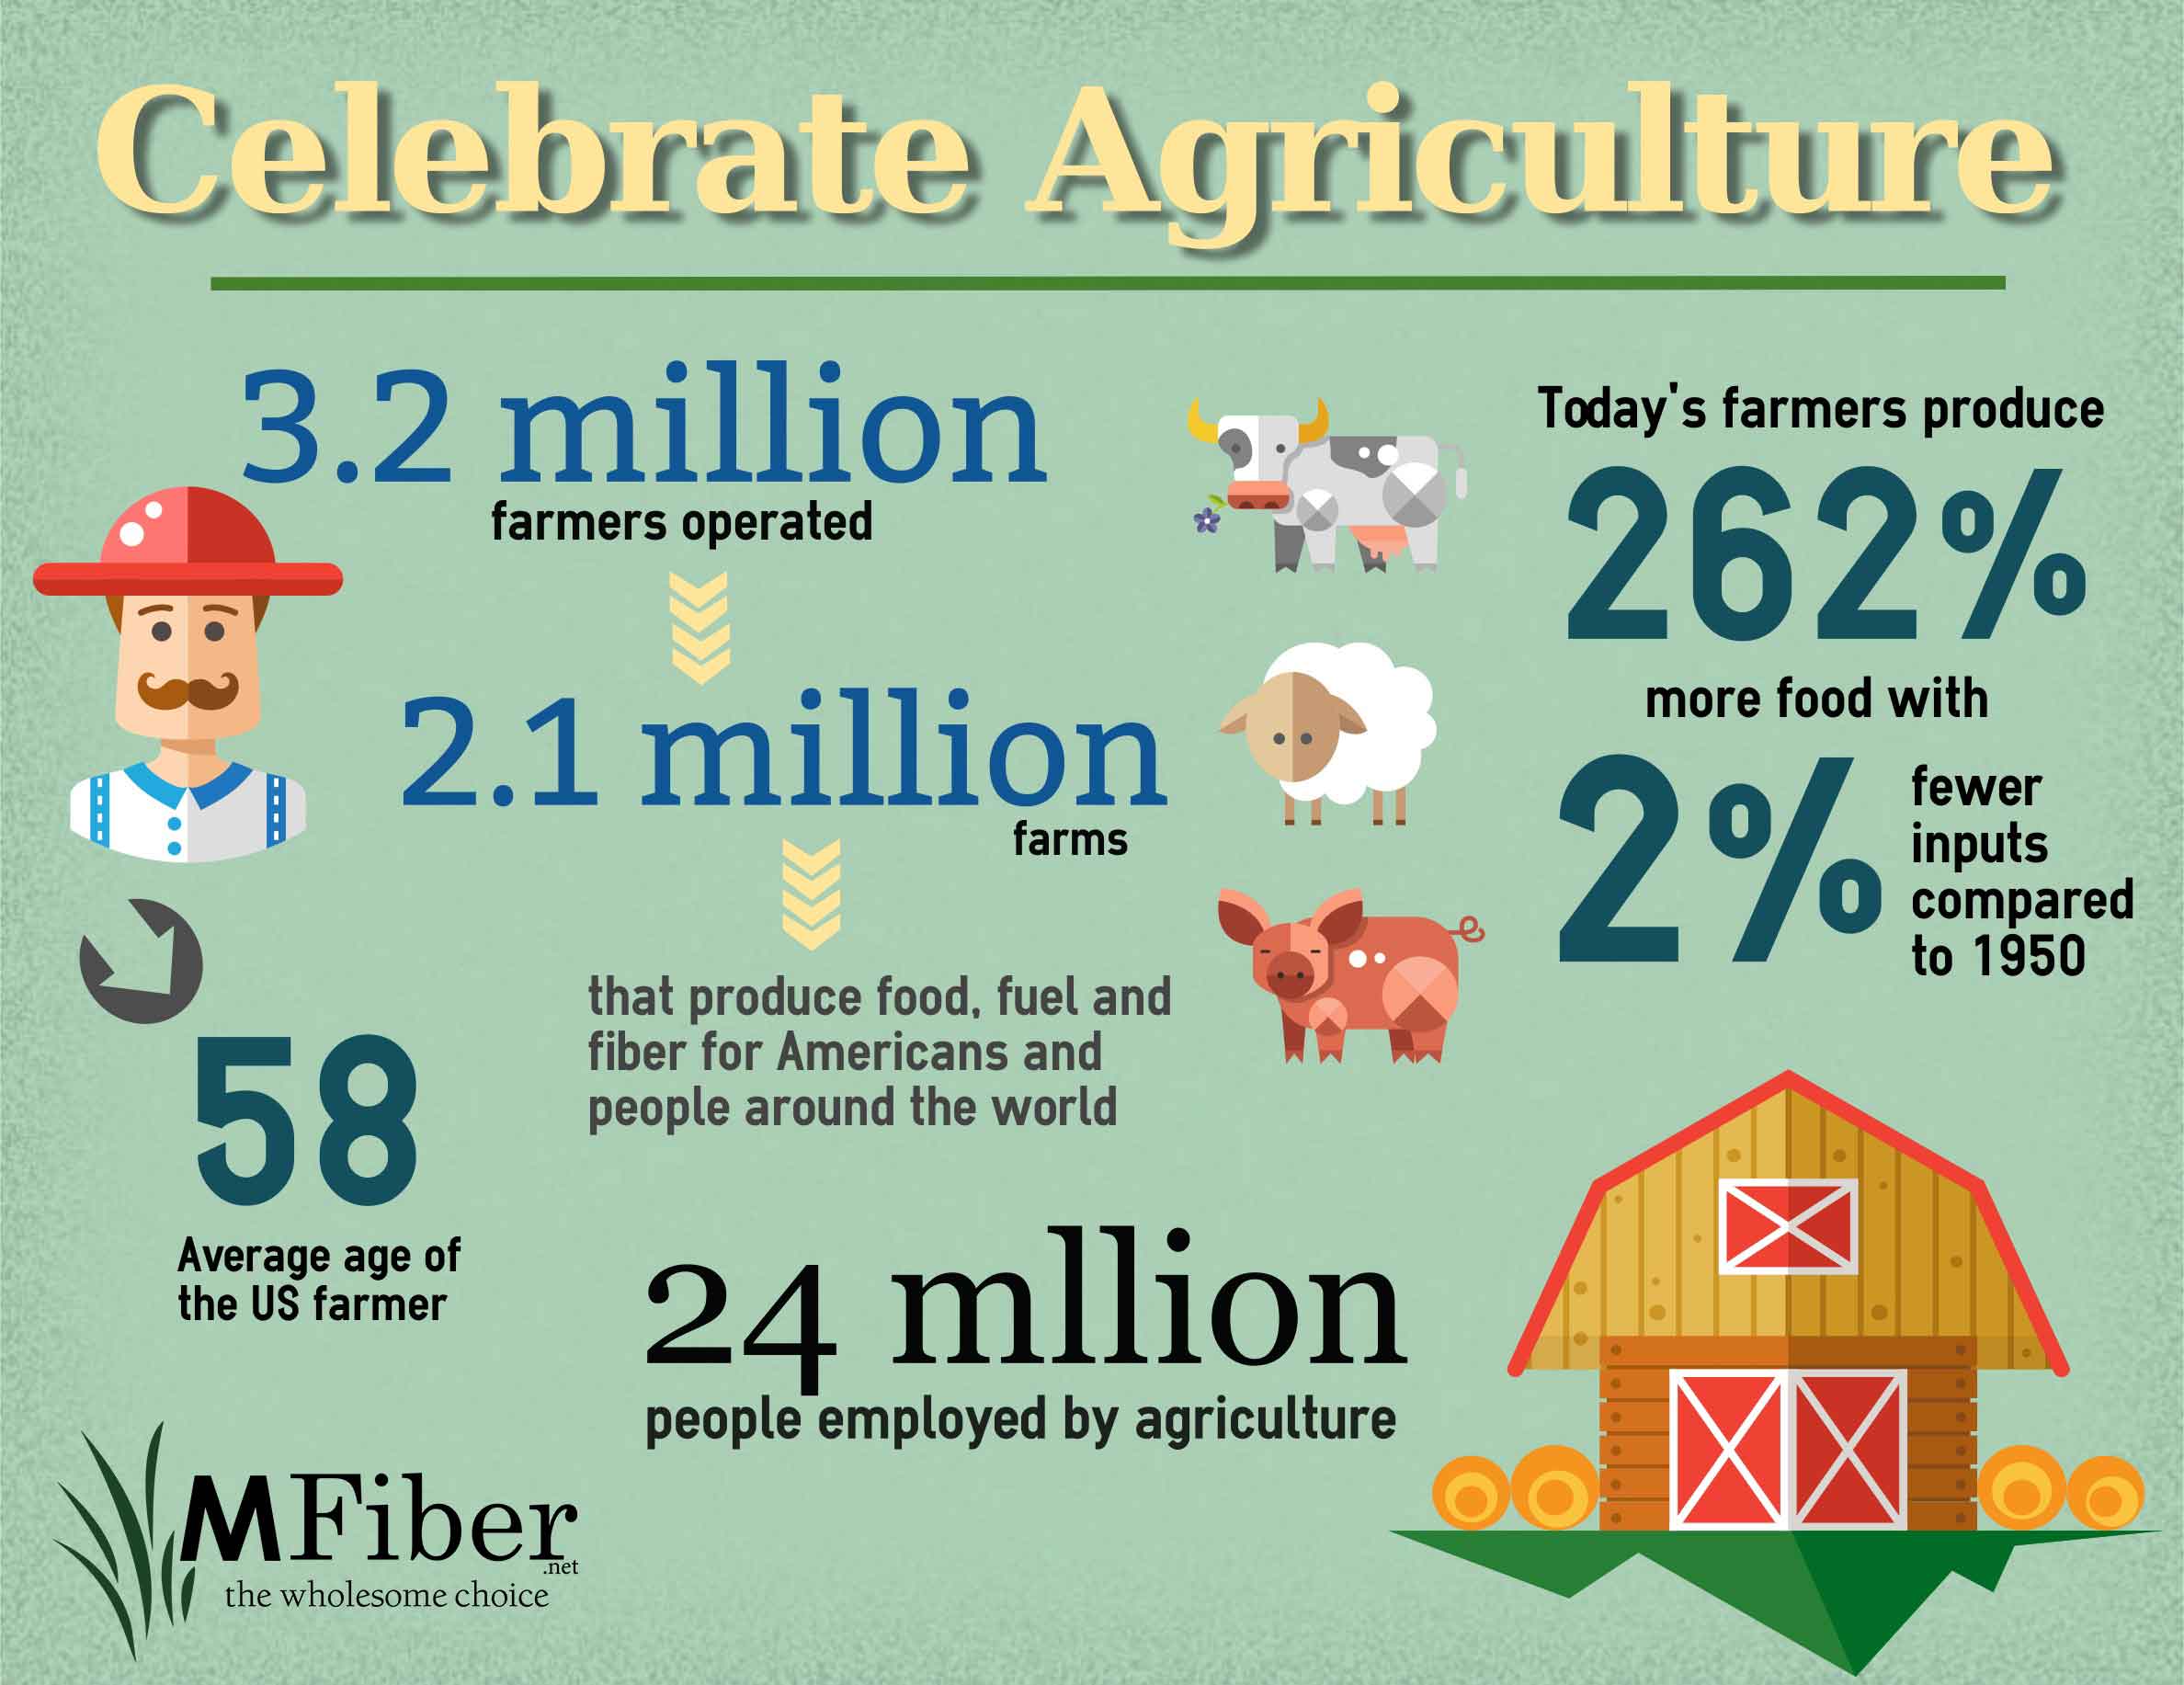 National Ag Week Reminds Us About Our Commitment to Farmers